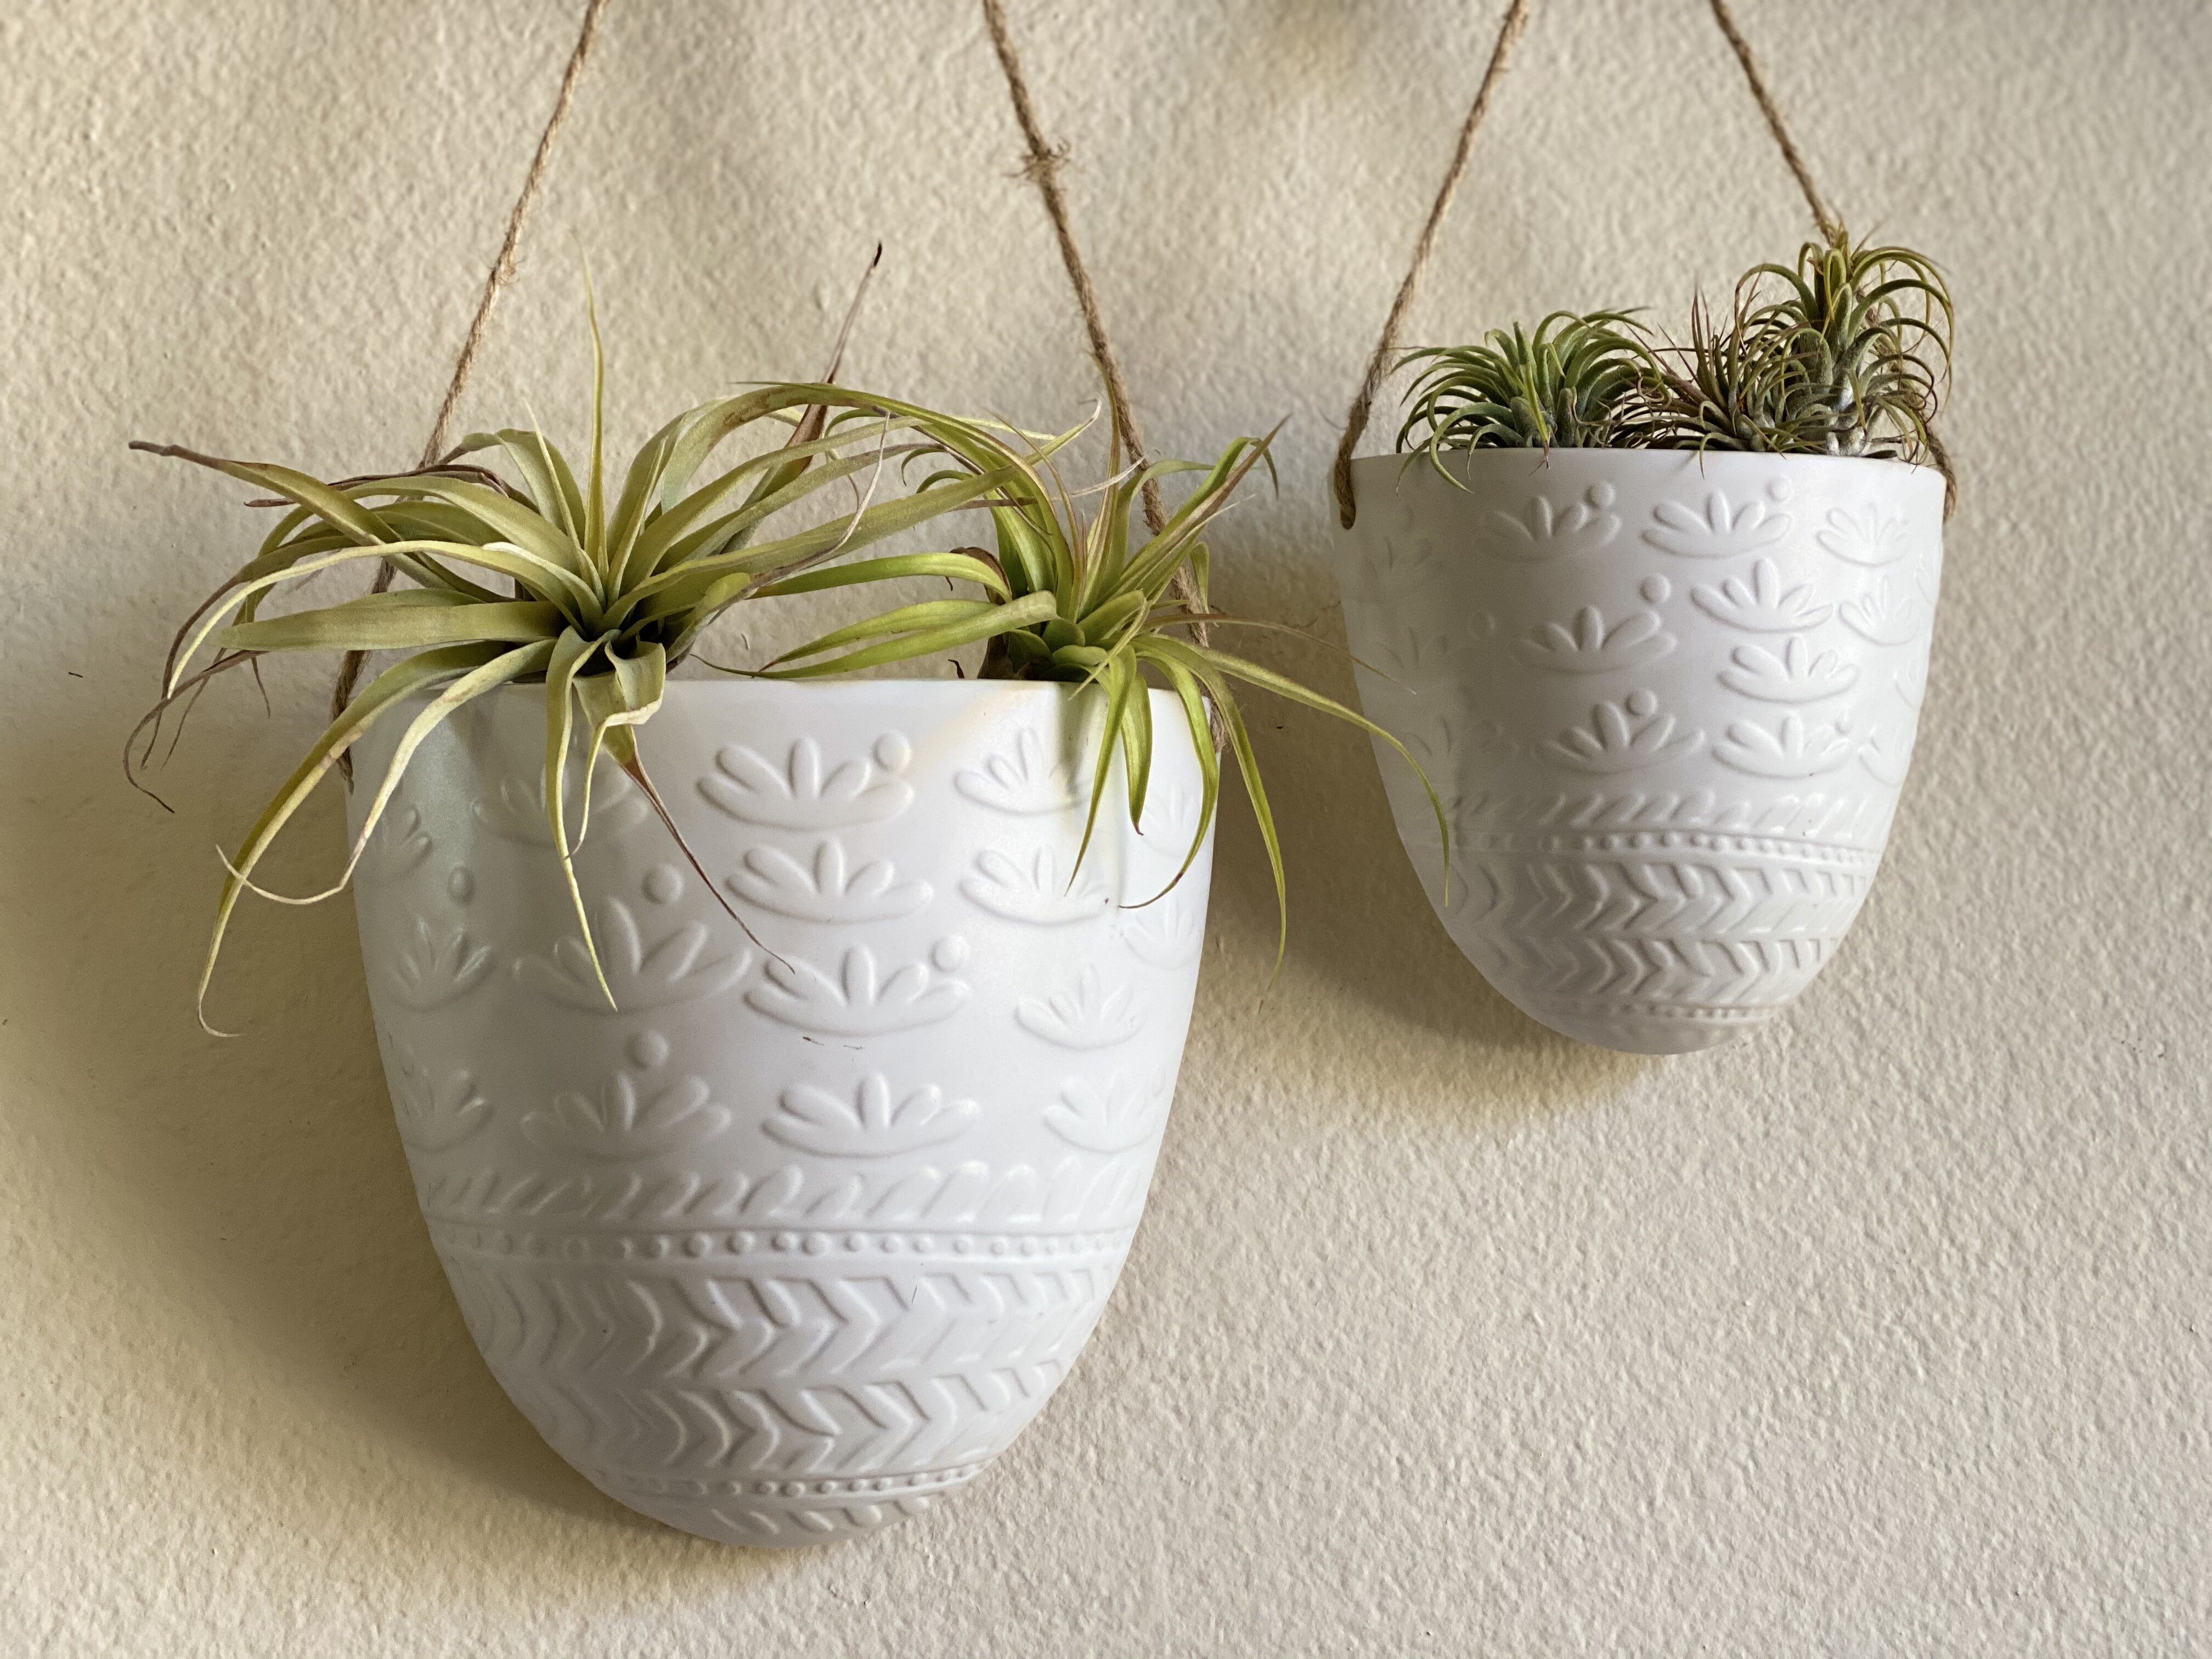 hanging planter with drainage ceramic flower pot 7 inches wide Crown Point Porcelain hanging 3-34 inches high hanging plant holder